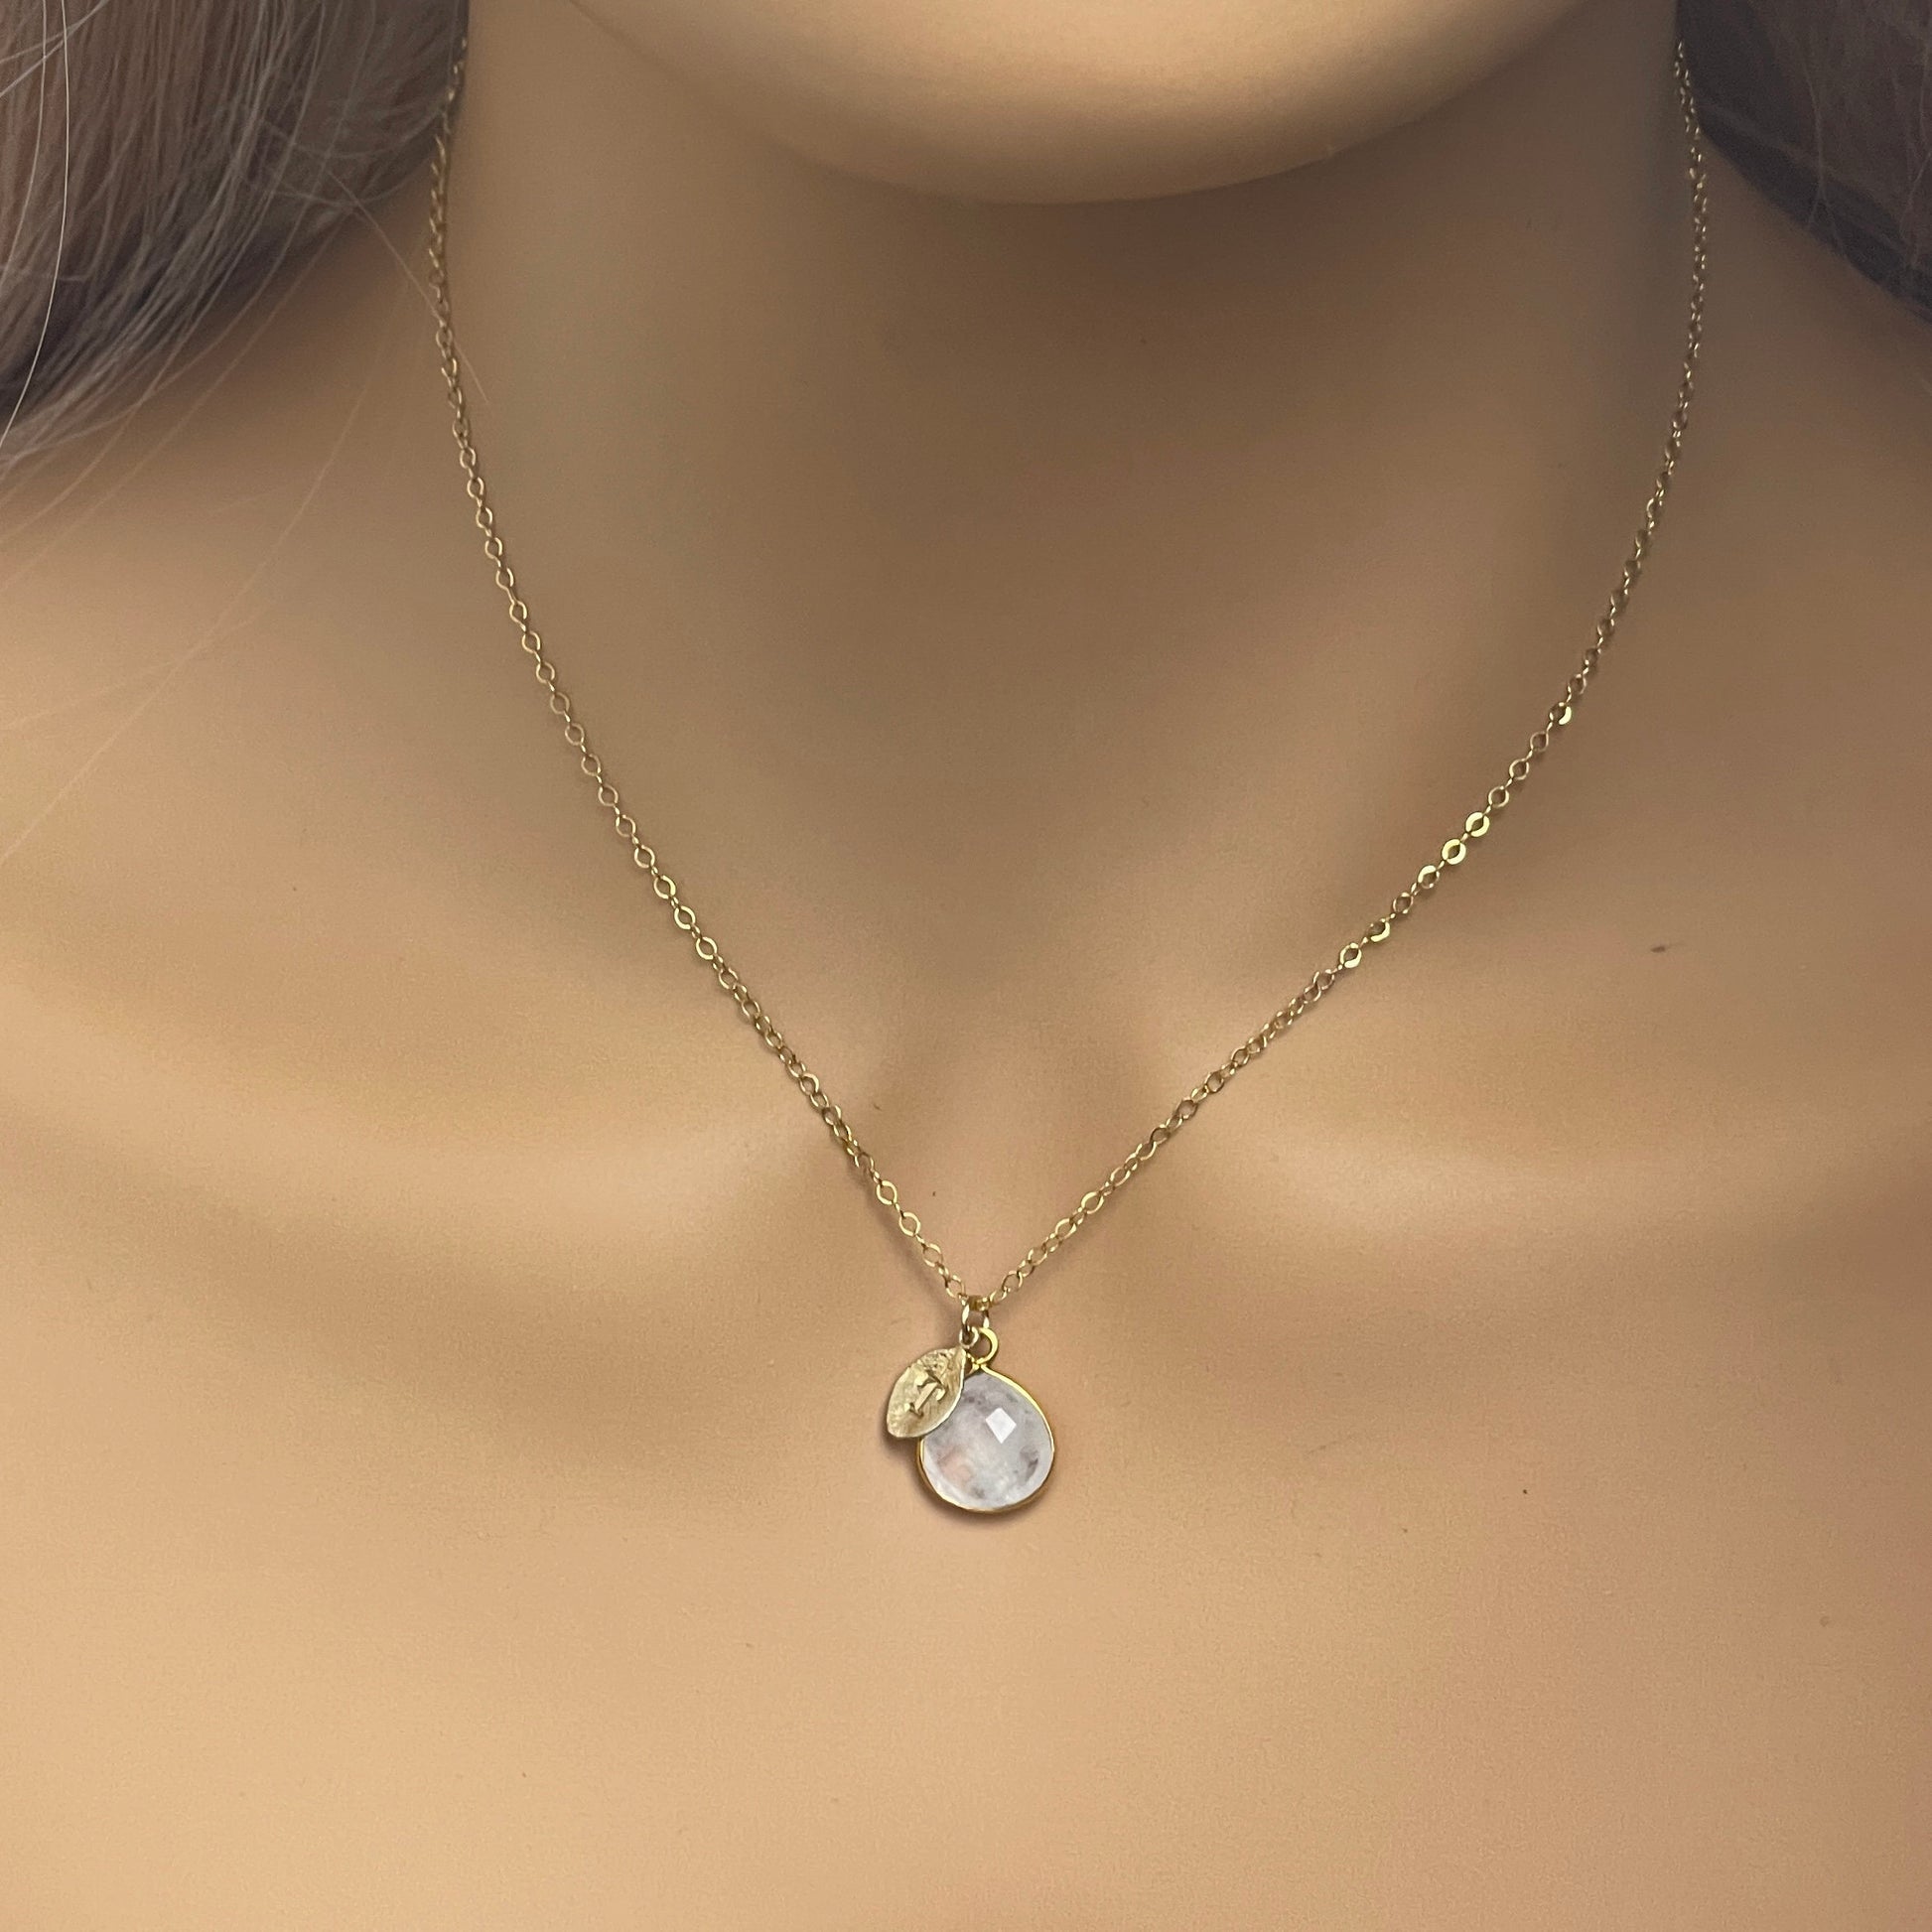 June Birthstone Necklace, Moonstone Necklace Gold, Personalized June Birthstone Necklace, White Crystal Pendant, Gifts For Mom, M6-79